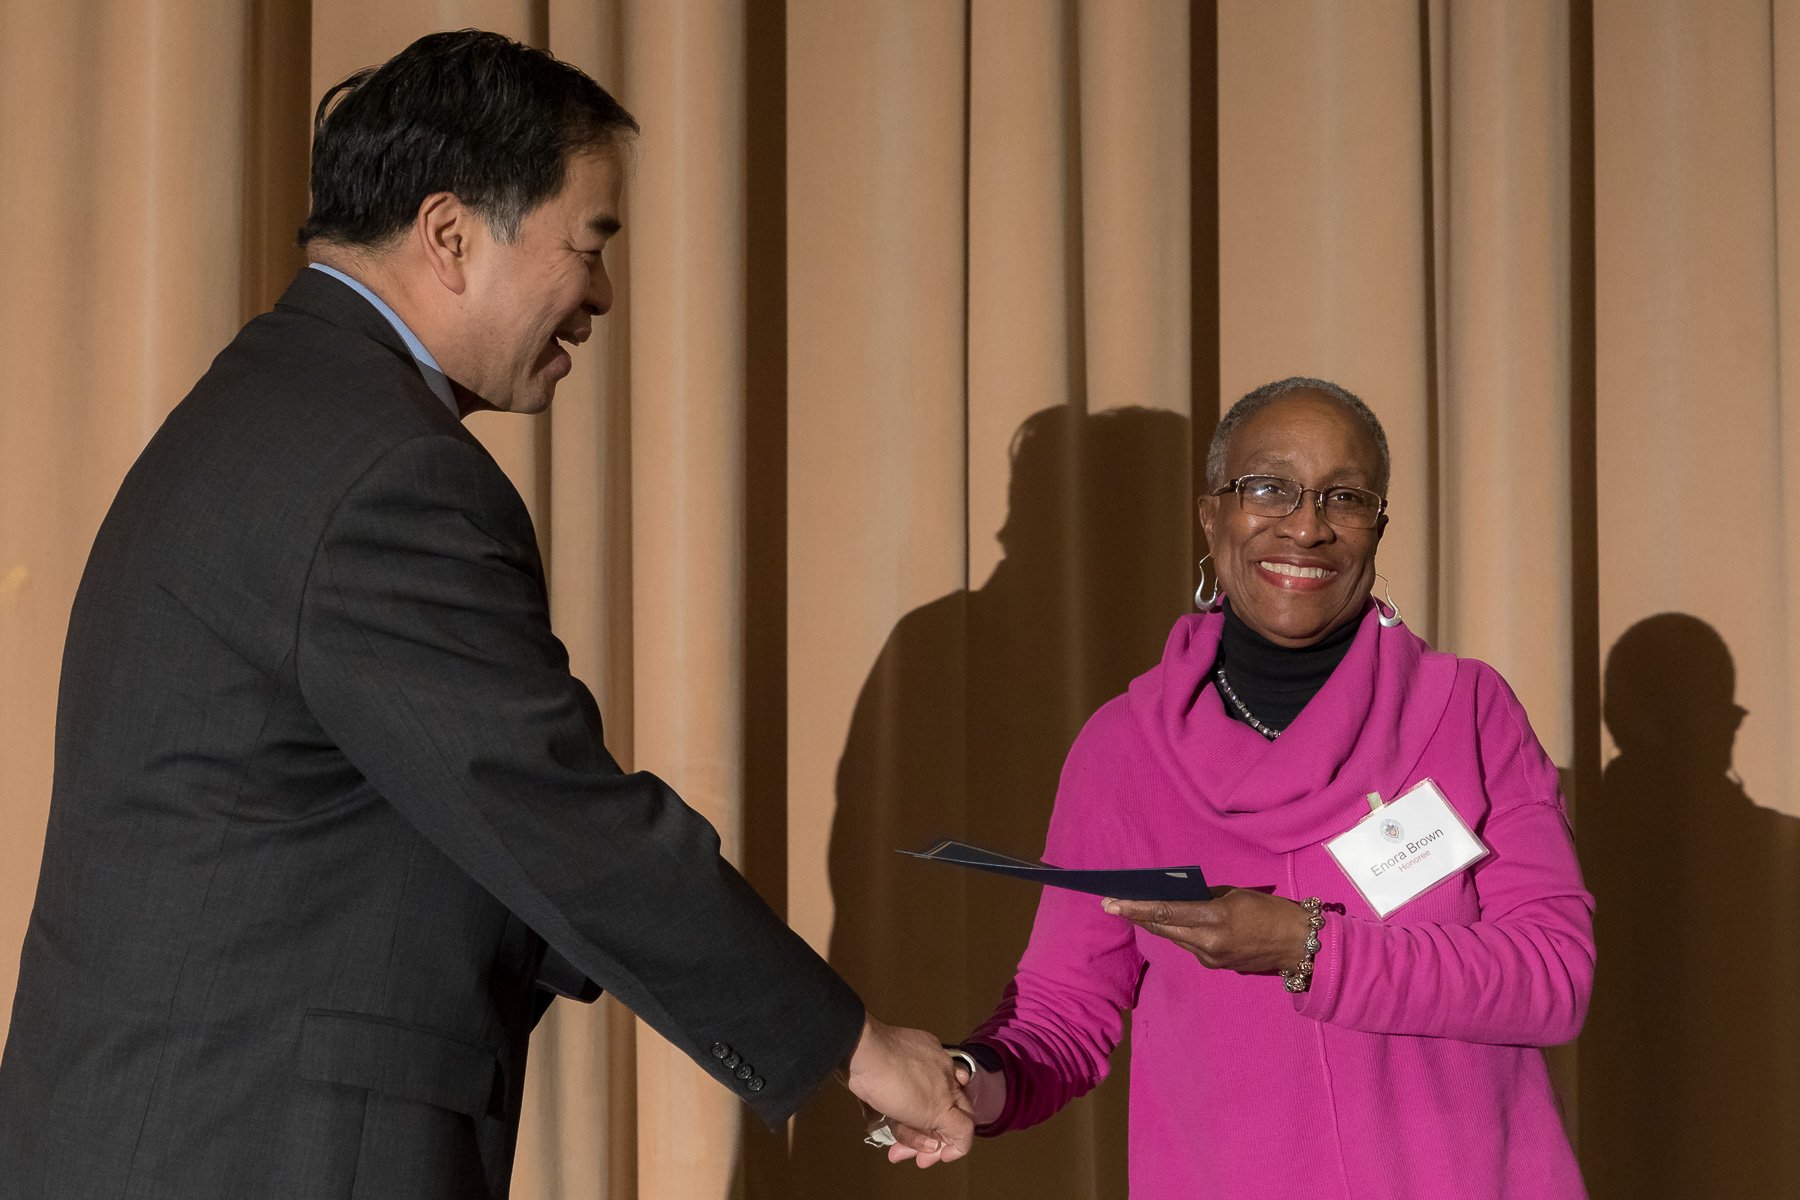 Enora Brown, right, with A. Gabriel Esteban, Ph.D., president, as faculty and staff members are inducted into DePaul University's 25 Year Club, Tuesday, Nov. 13, 2018, at the Lincoln Park Student Center. Employees celebrating their 25th work anniversary were honored at the luncheon with their colleagues and will have their names added to plaques located on the Loop and Lincoln Park Campuses. (DePaul University/Jeff Carrion)